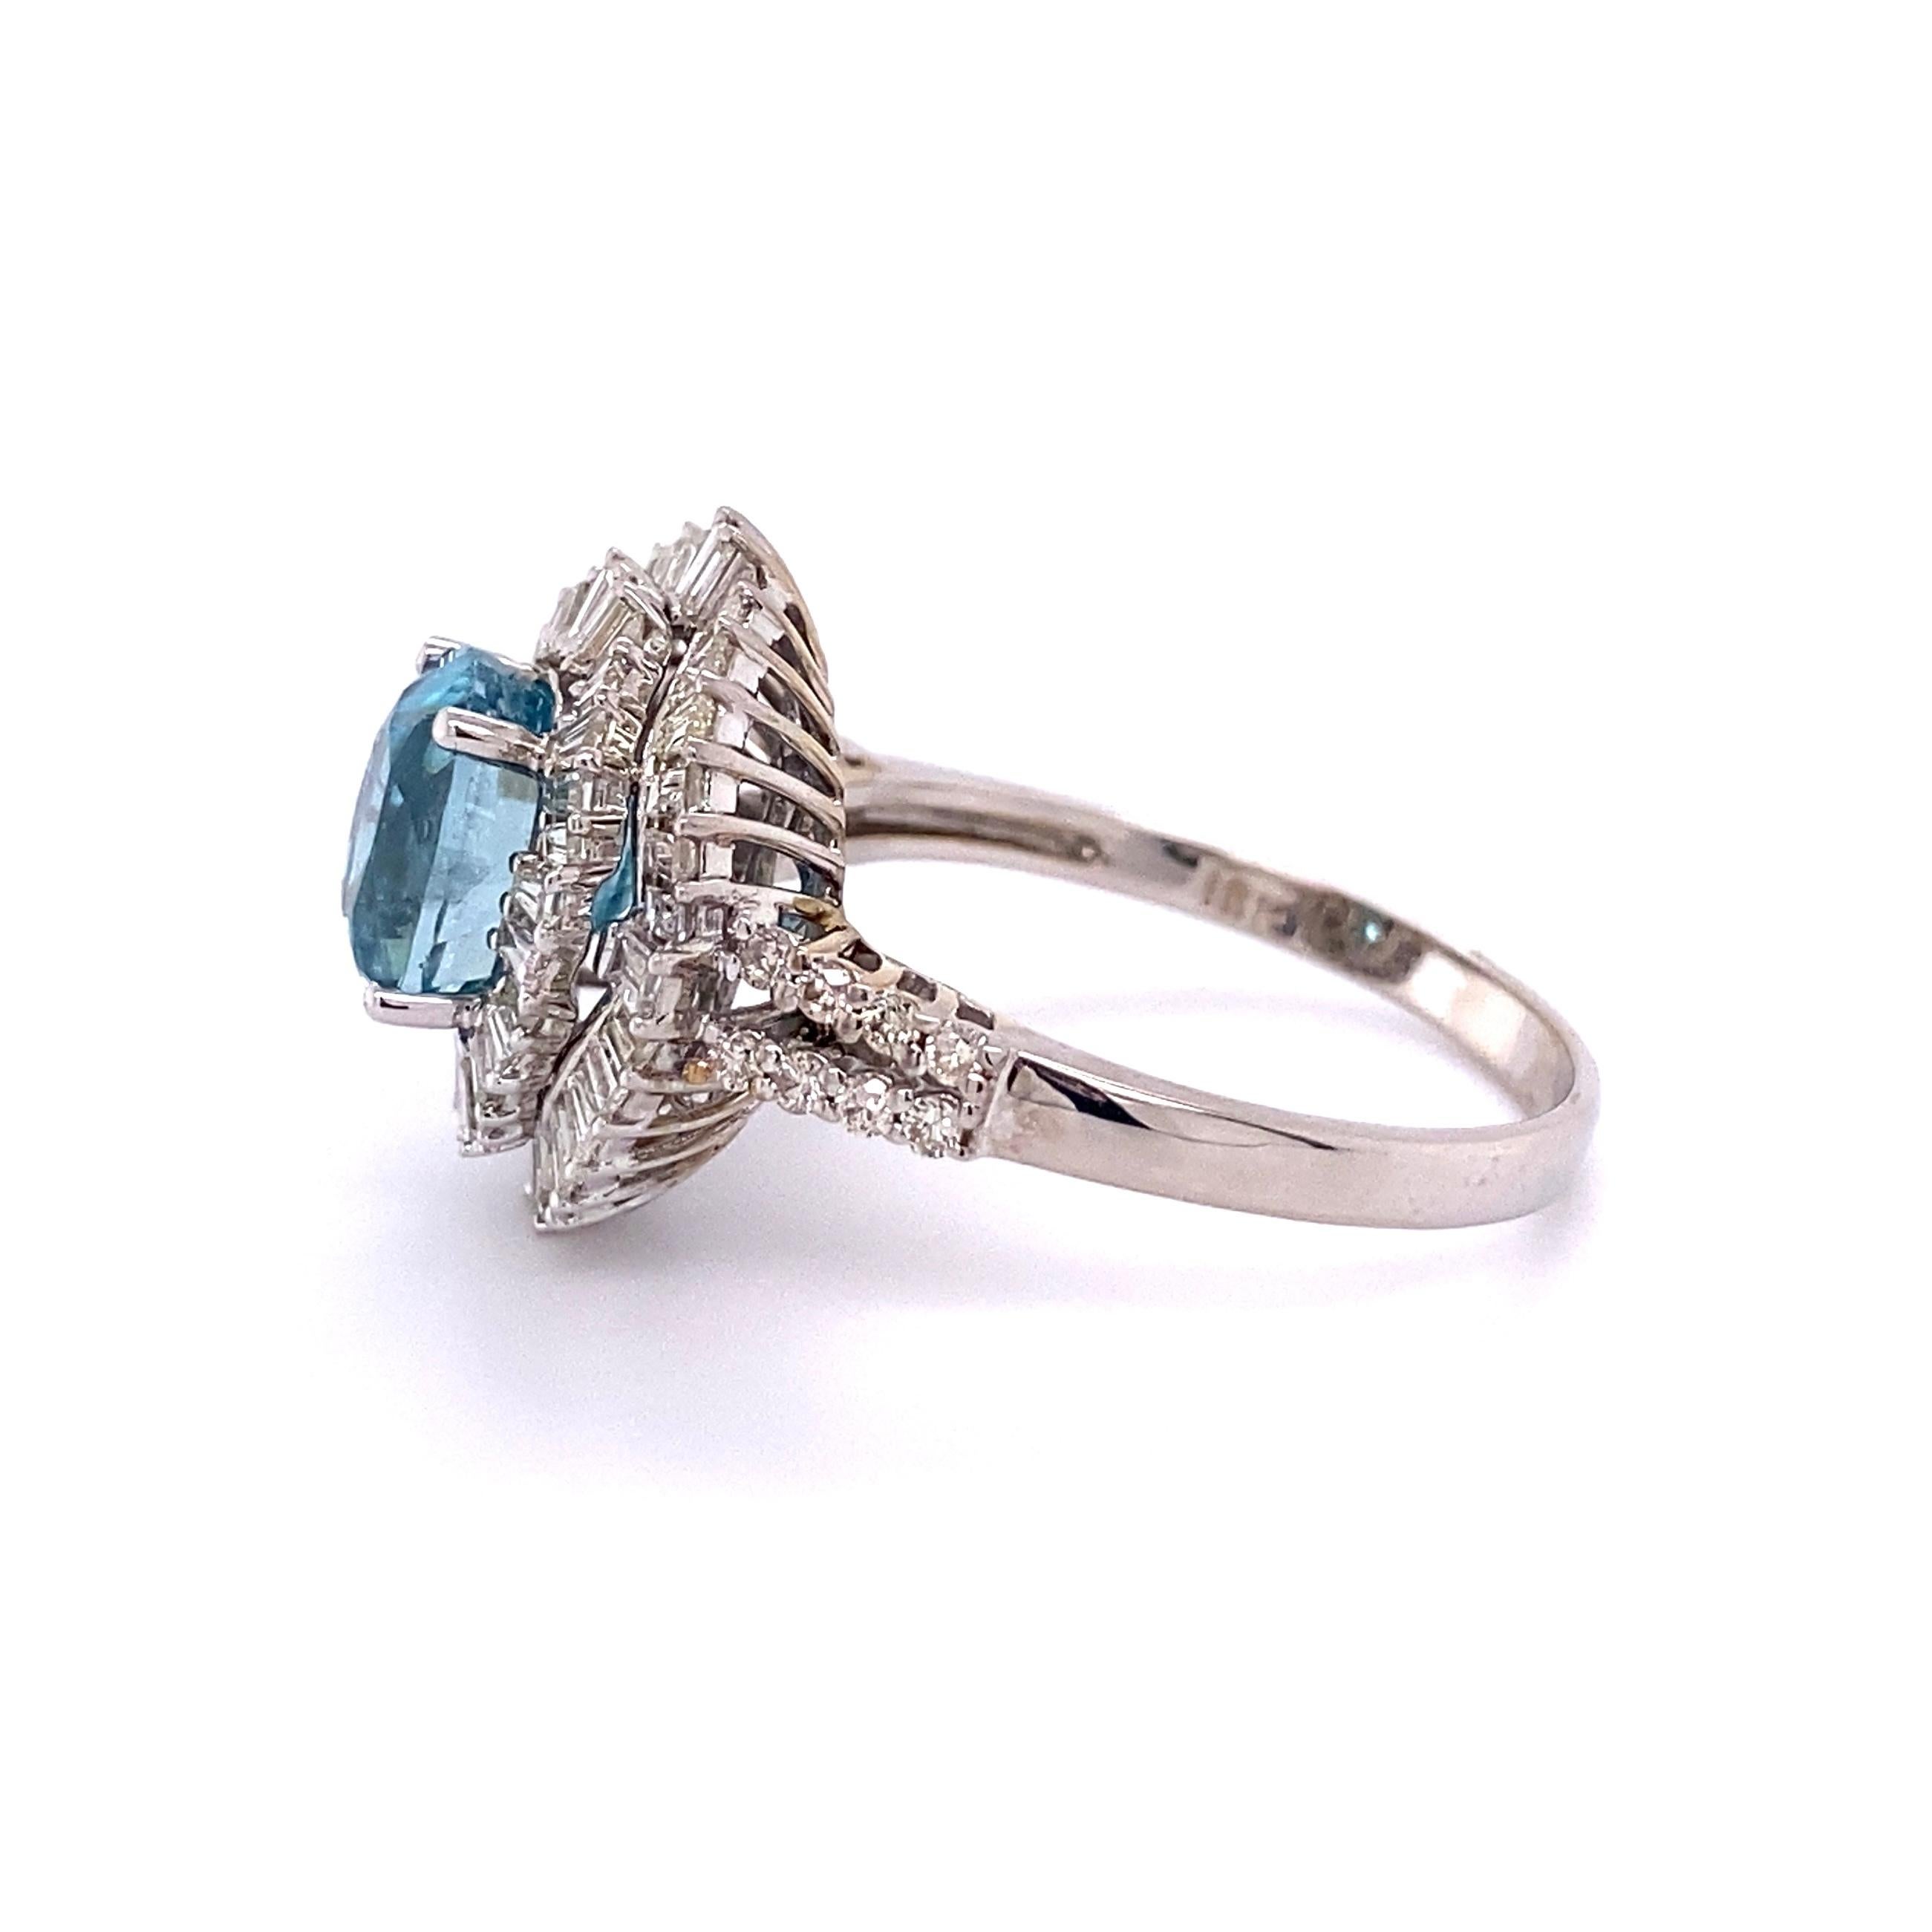 5.24 Carat Blue Zircon and Diamond Gold Cocktail Ring Estate Fine Jewelry For Sale 1